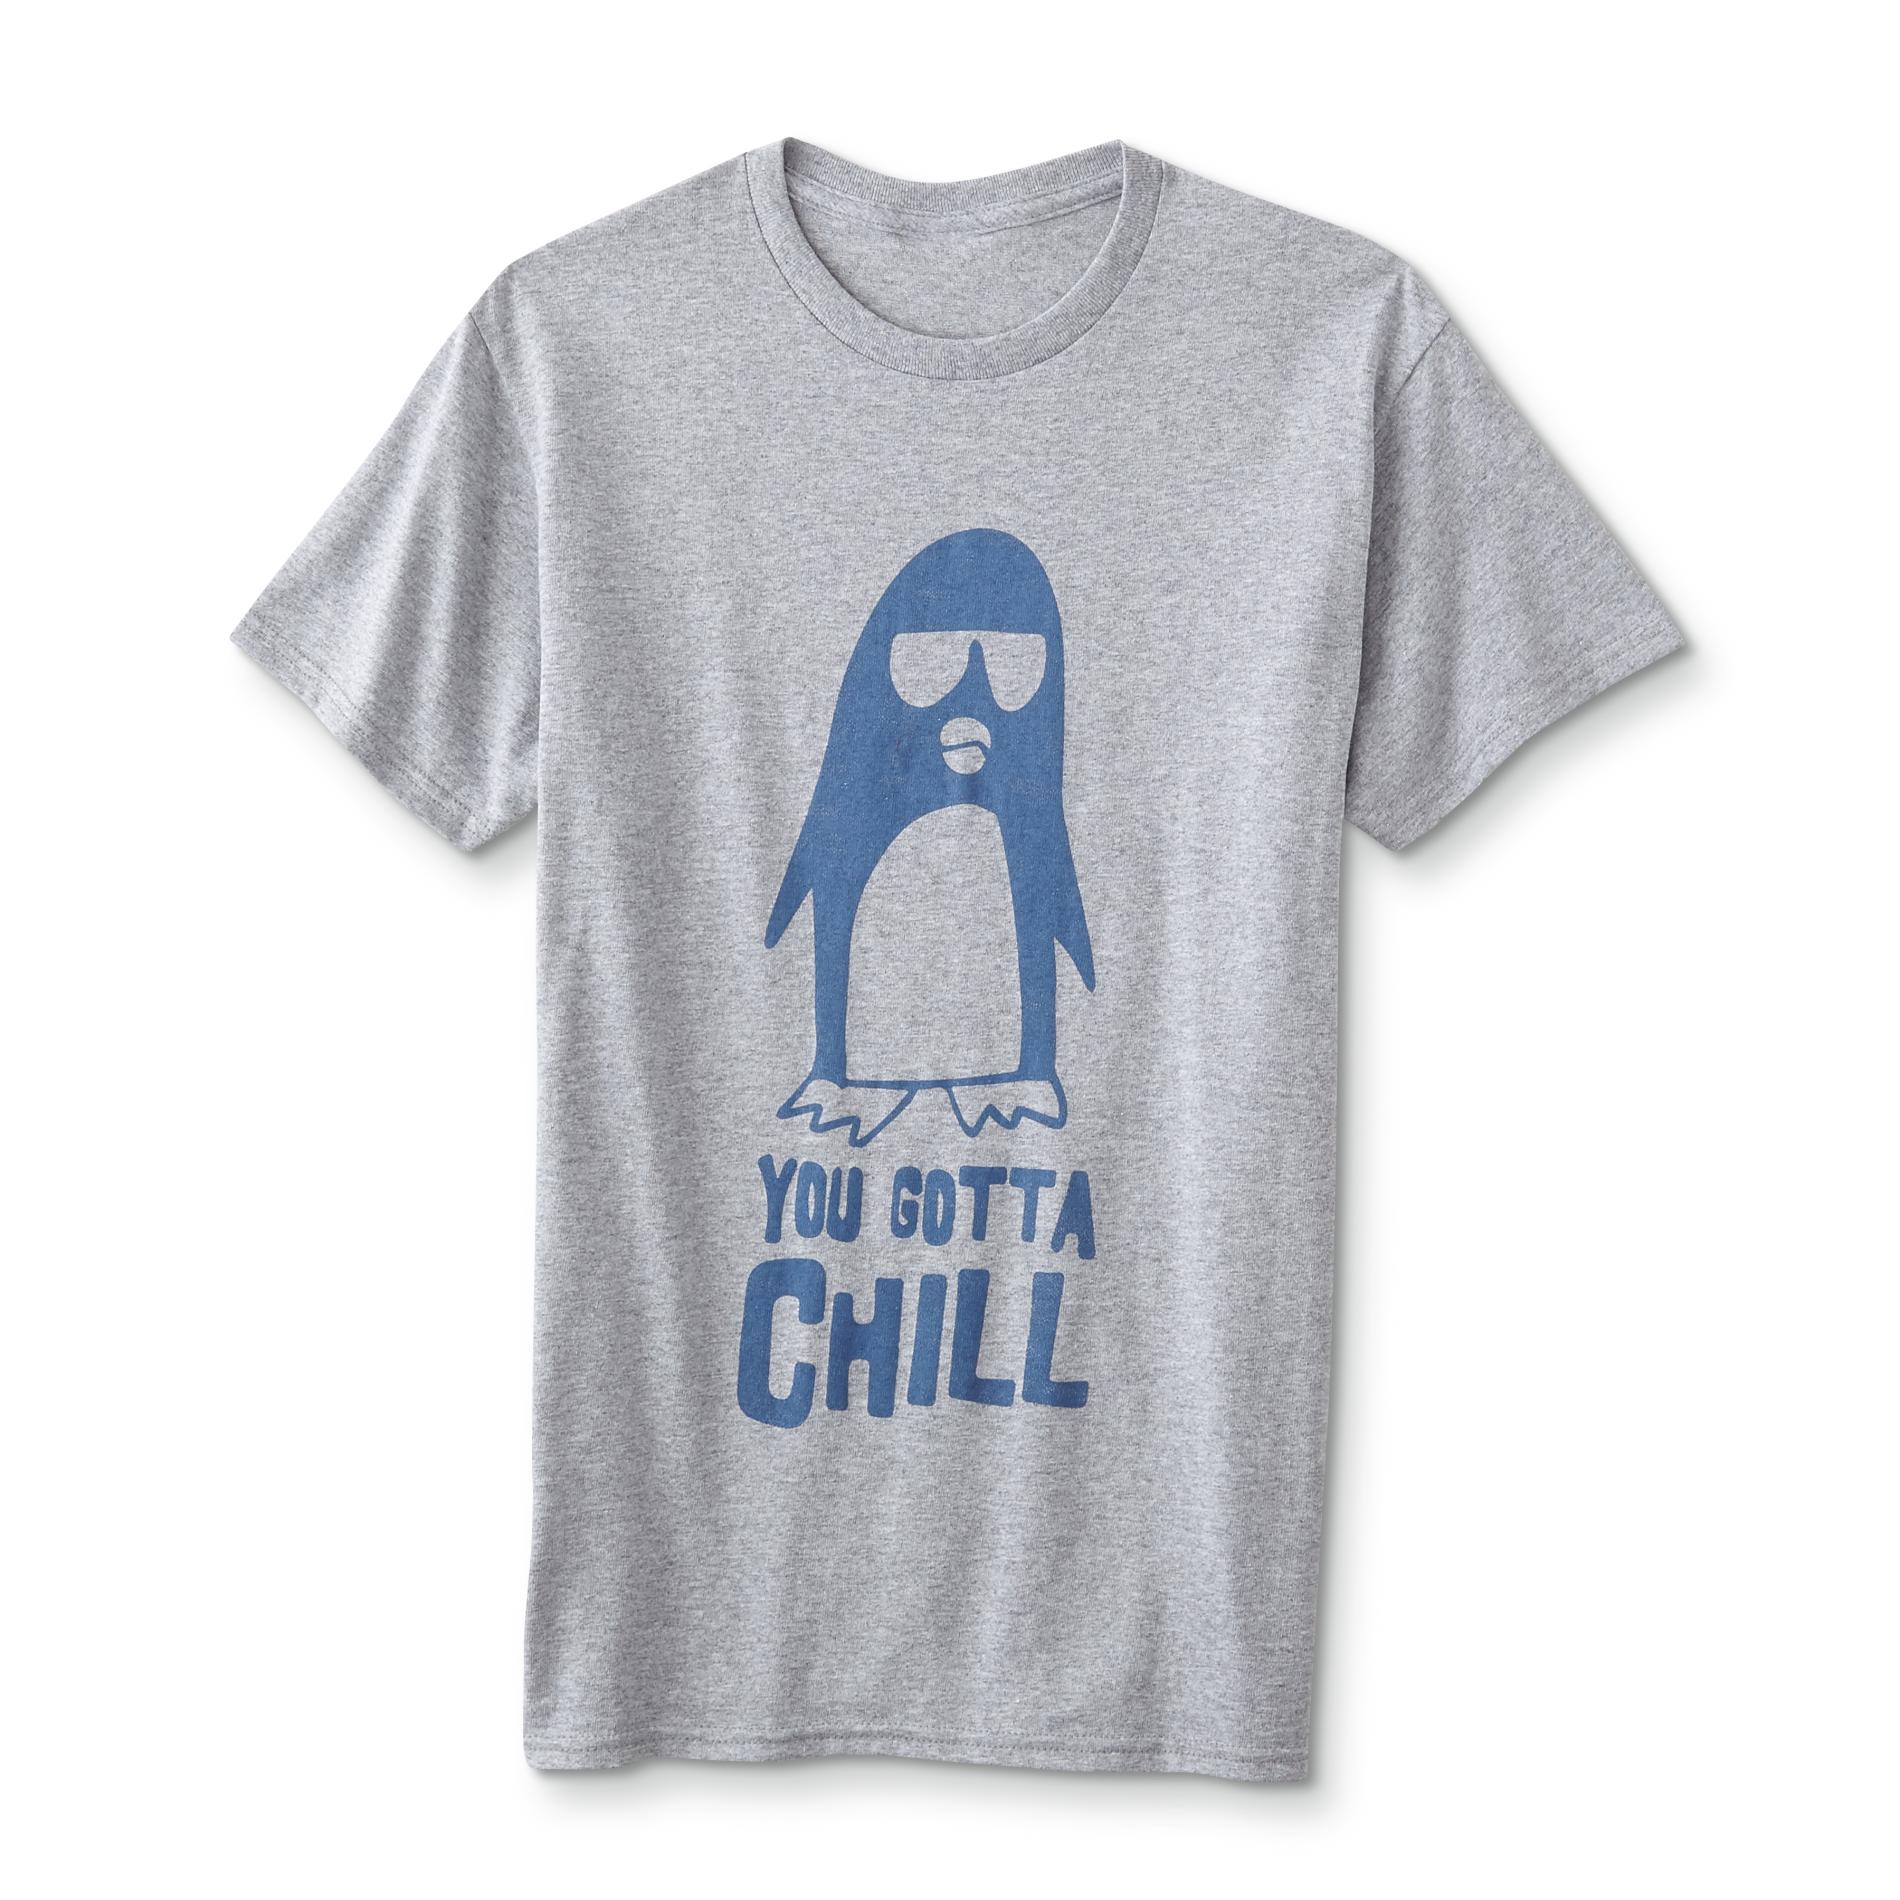 Young Men's Graphic T-Shirt - Penguin/You Gotta Chill